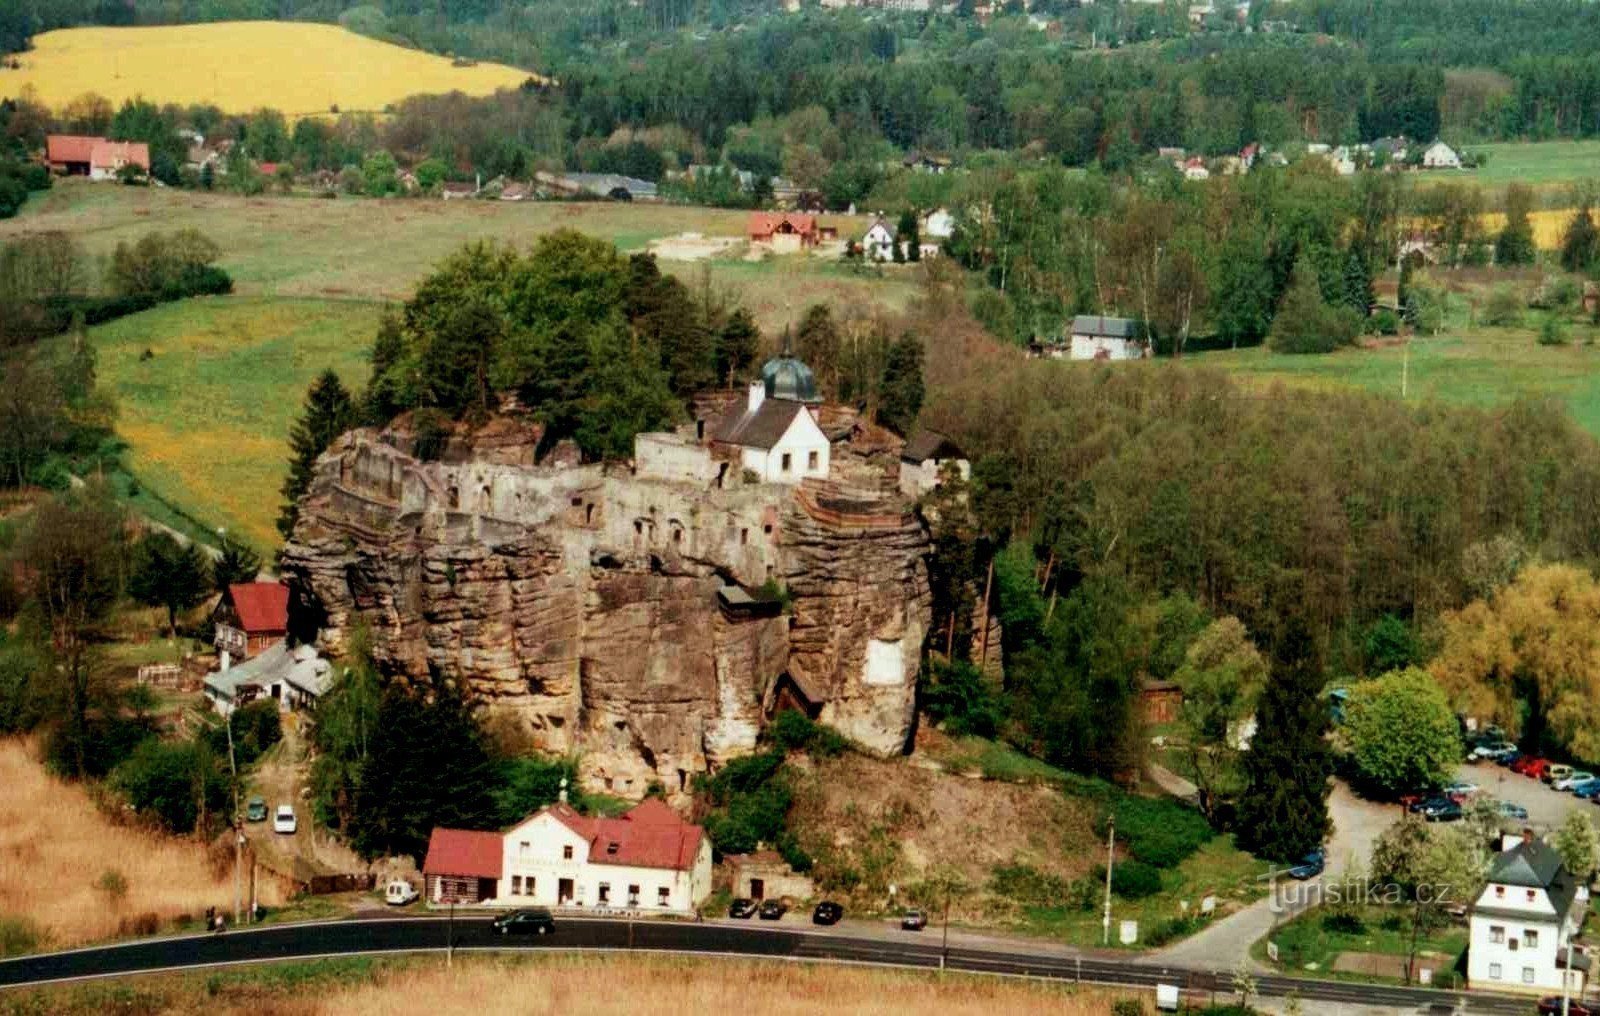 Sloup castle from the lookout (now there is also a lookout tower)